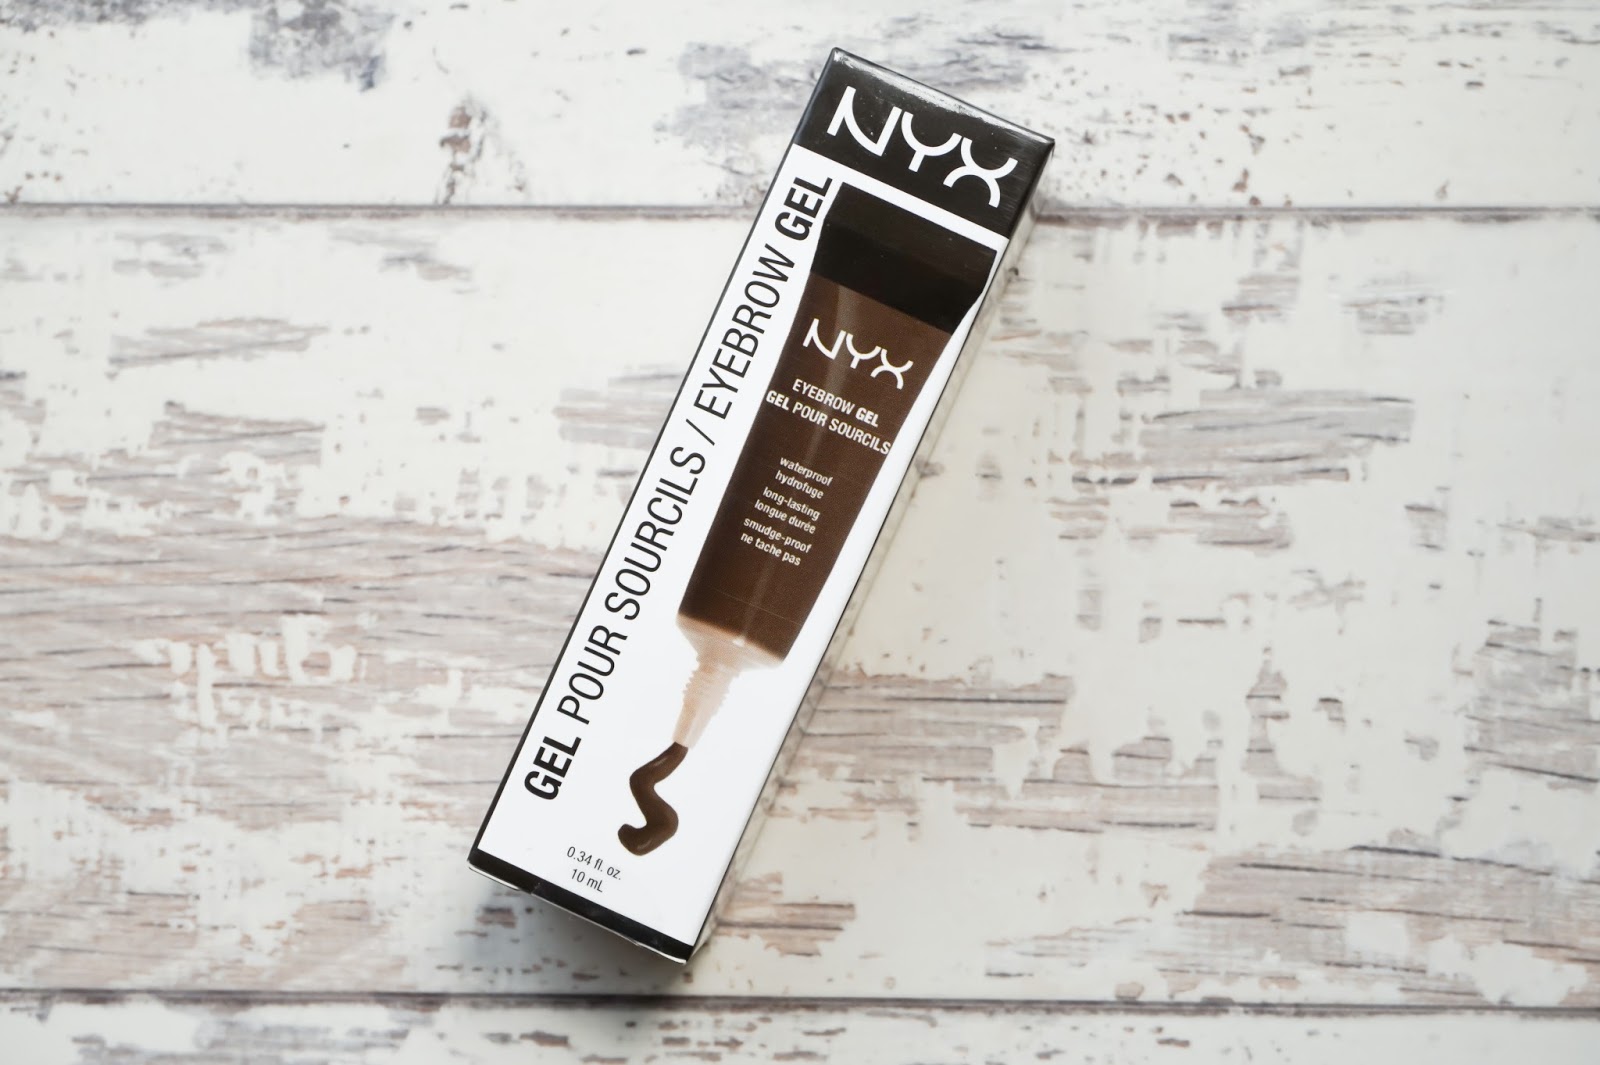 EYEBROW GEL IN ESPRESSO discoveriesofself blog swatches review nyx uk cosmetics